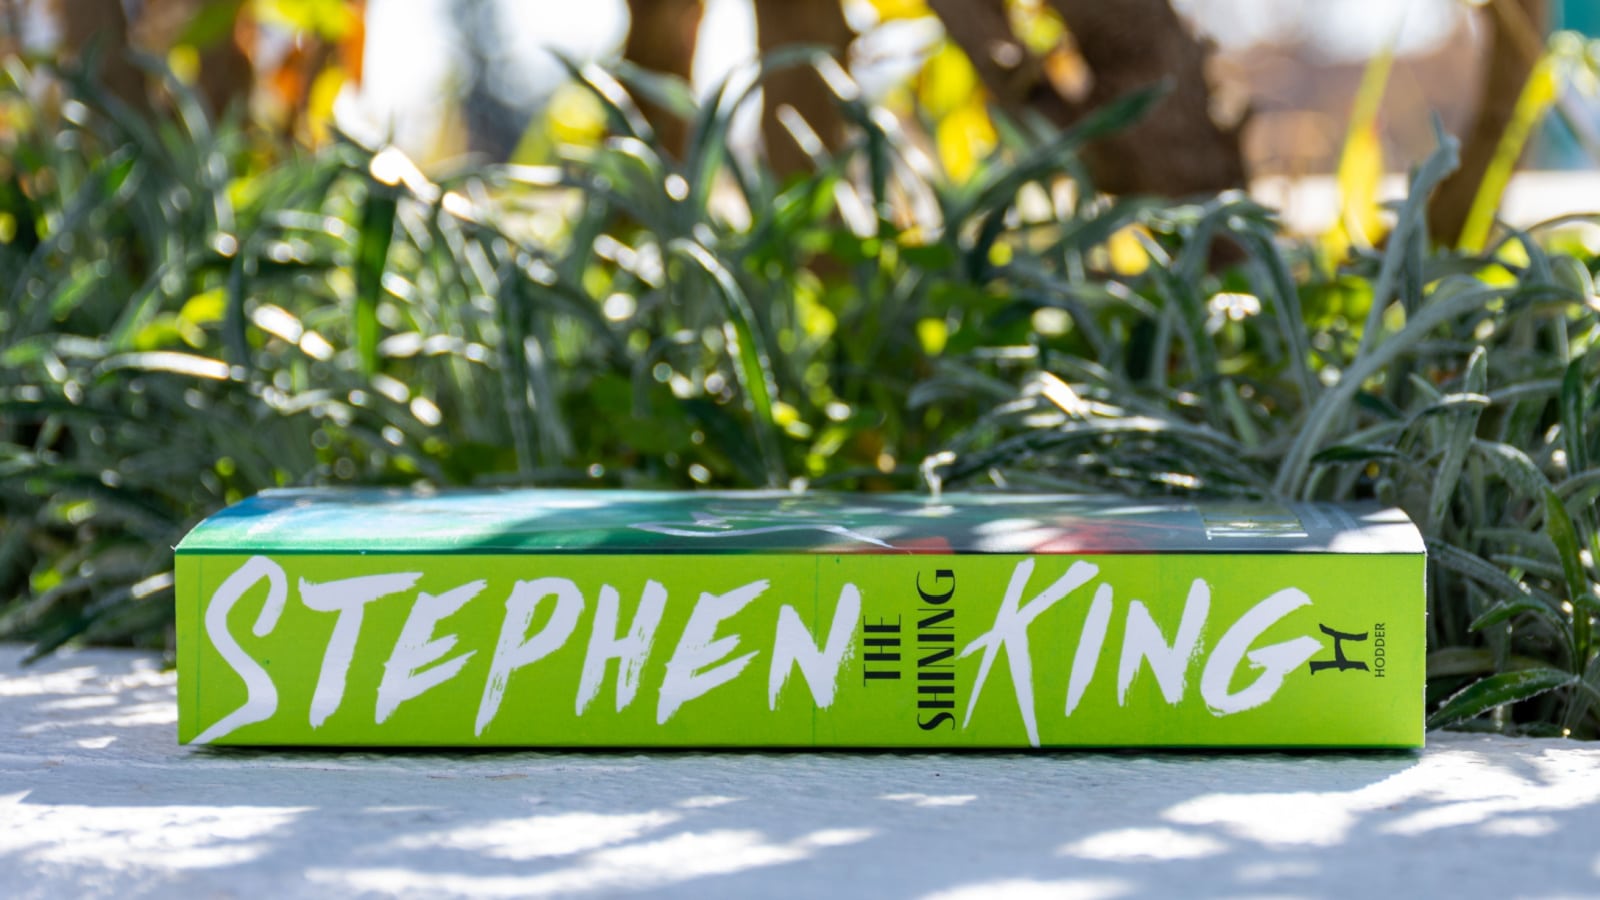 Setif, Algeria - January 08, 2023: Close-up the American author Stephen King's The Shining novel in the garden on a beautiful day.